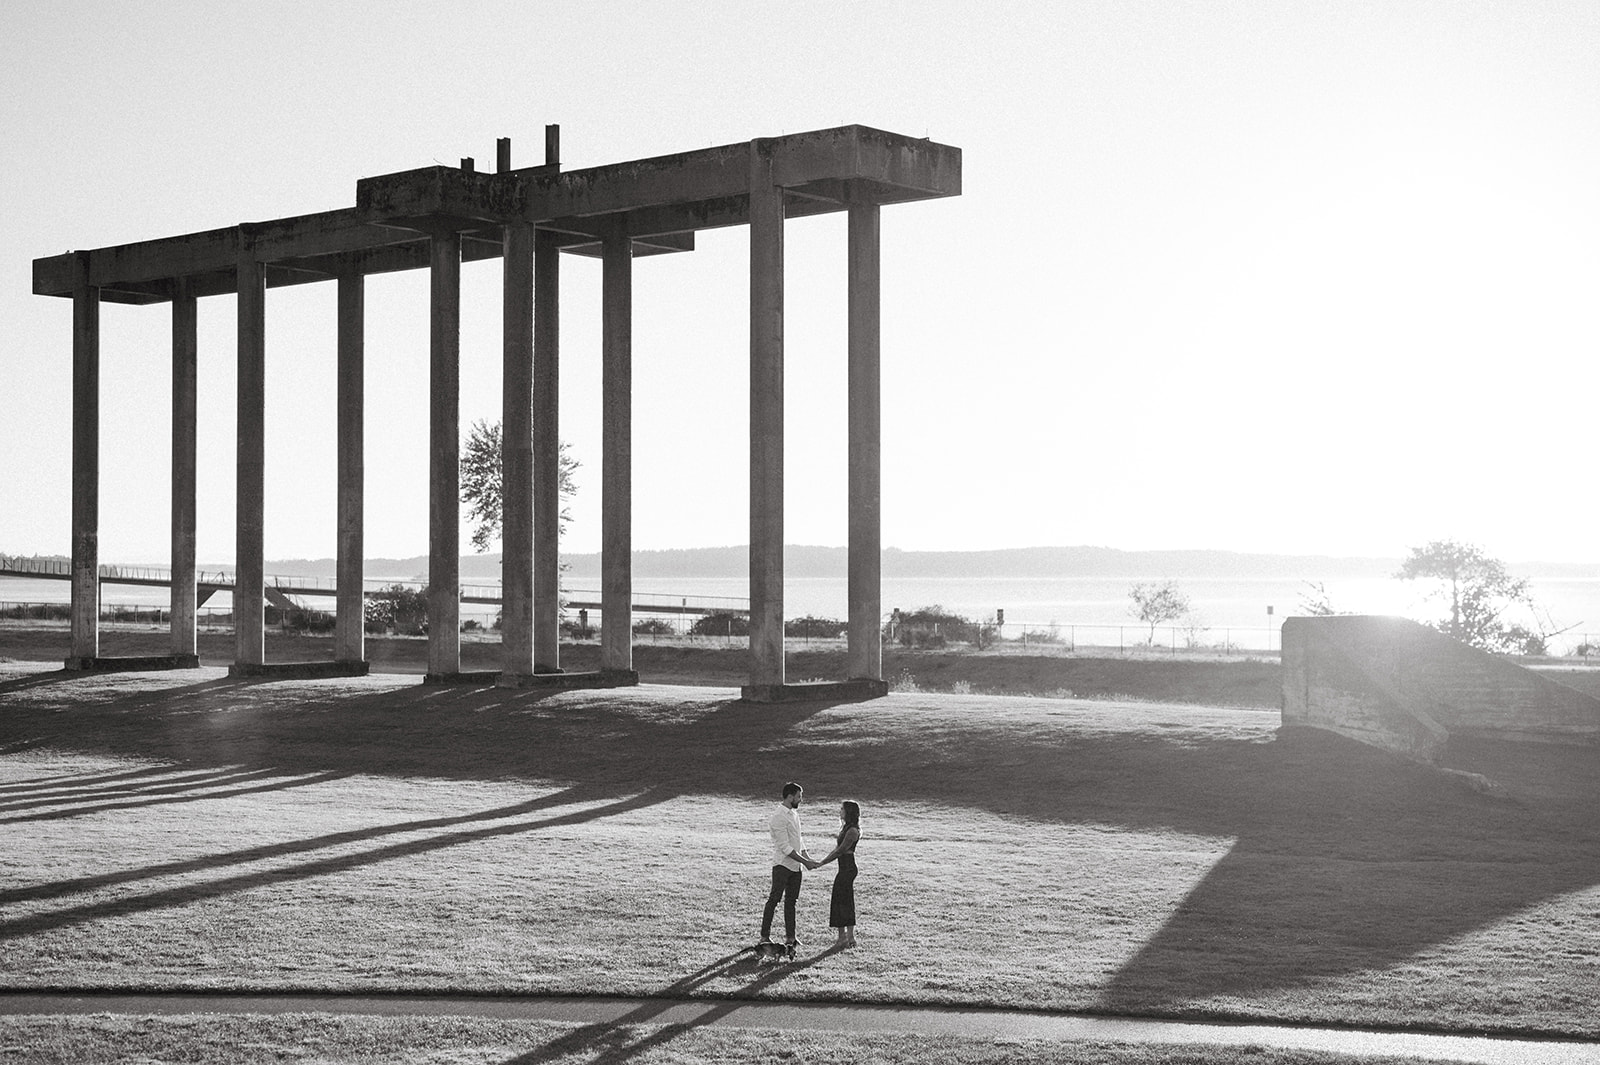 A couple holding hands under a large concrete structure by the water.